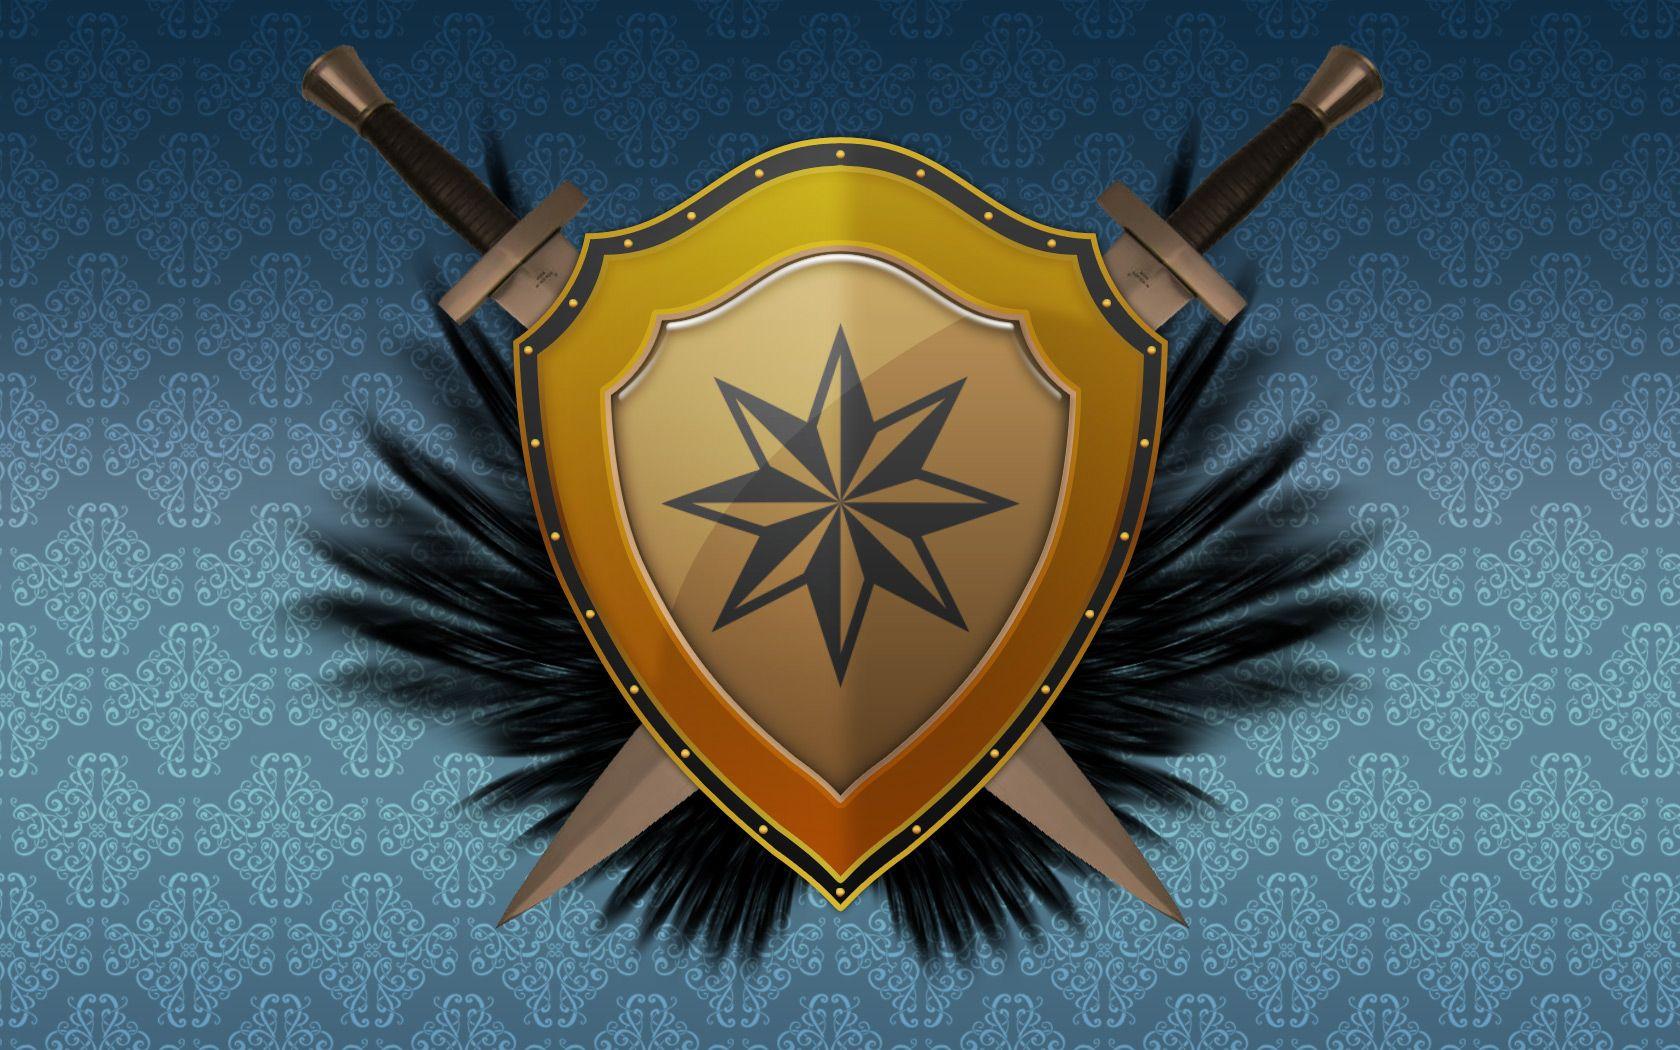 Sword and Shield Wallpapers - Top Free Sword and Shield Backgrounds